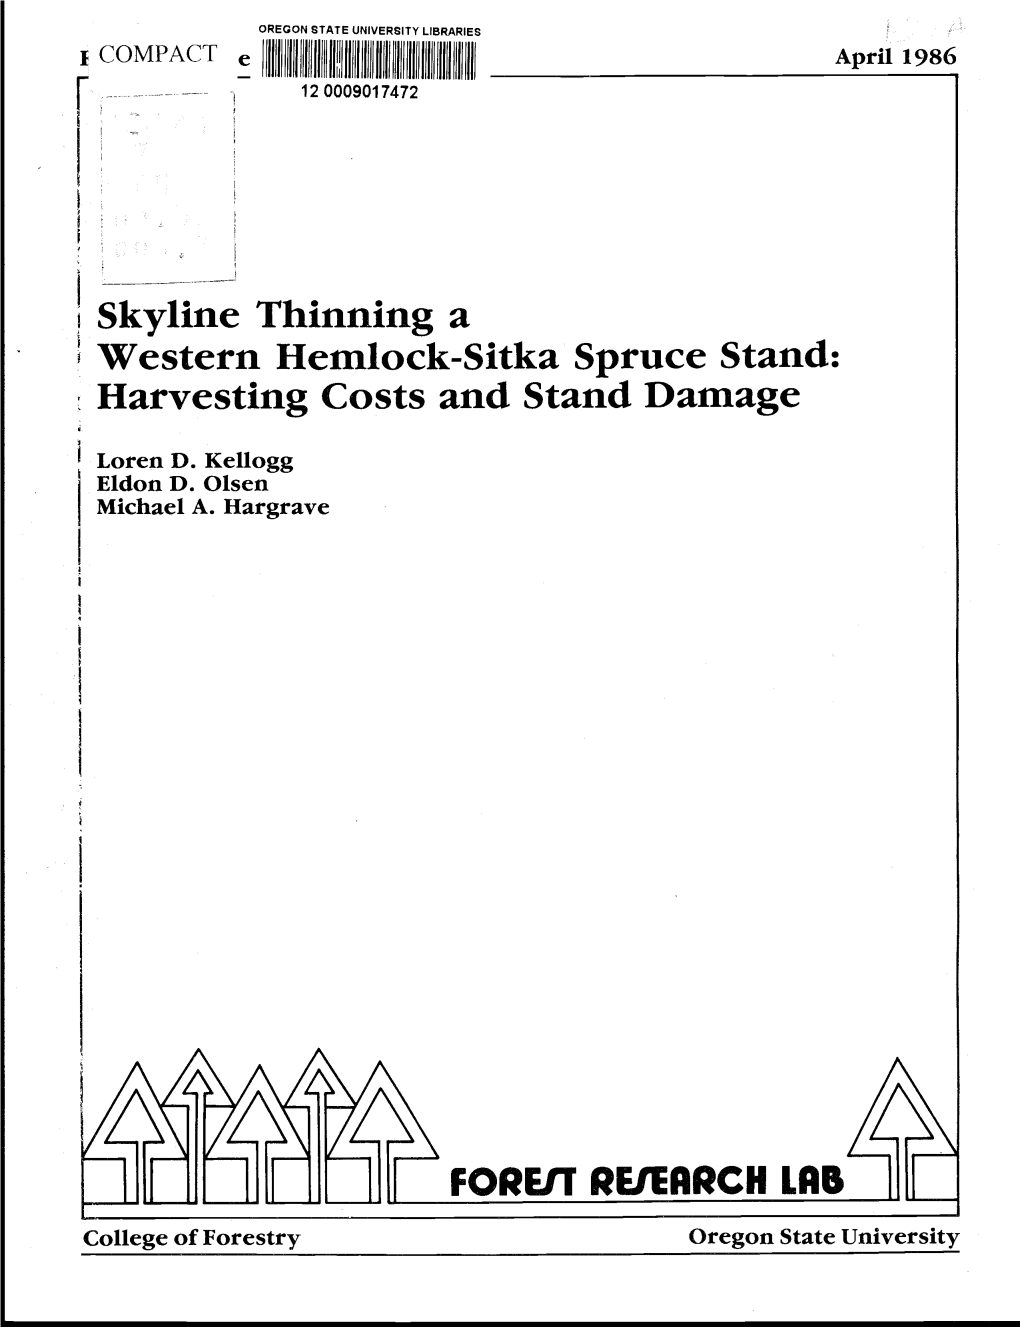 Skyline Thinning a Western Hemlock-Sitka Spruce Stand: Harvesting Costs and Stand Damage